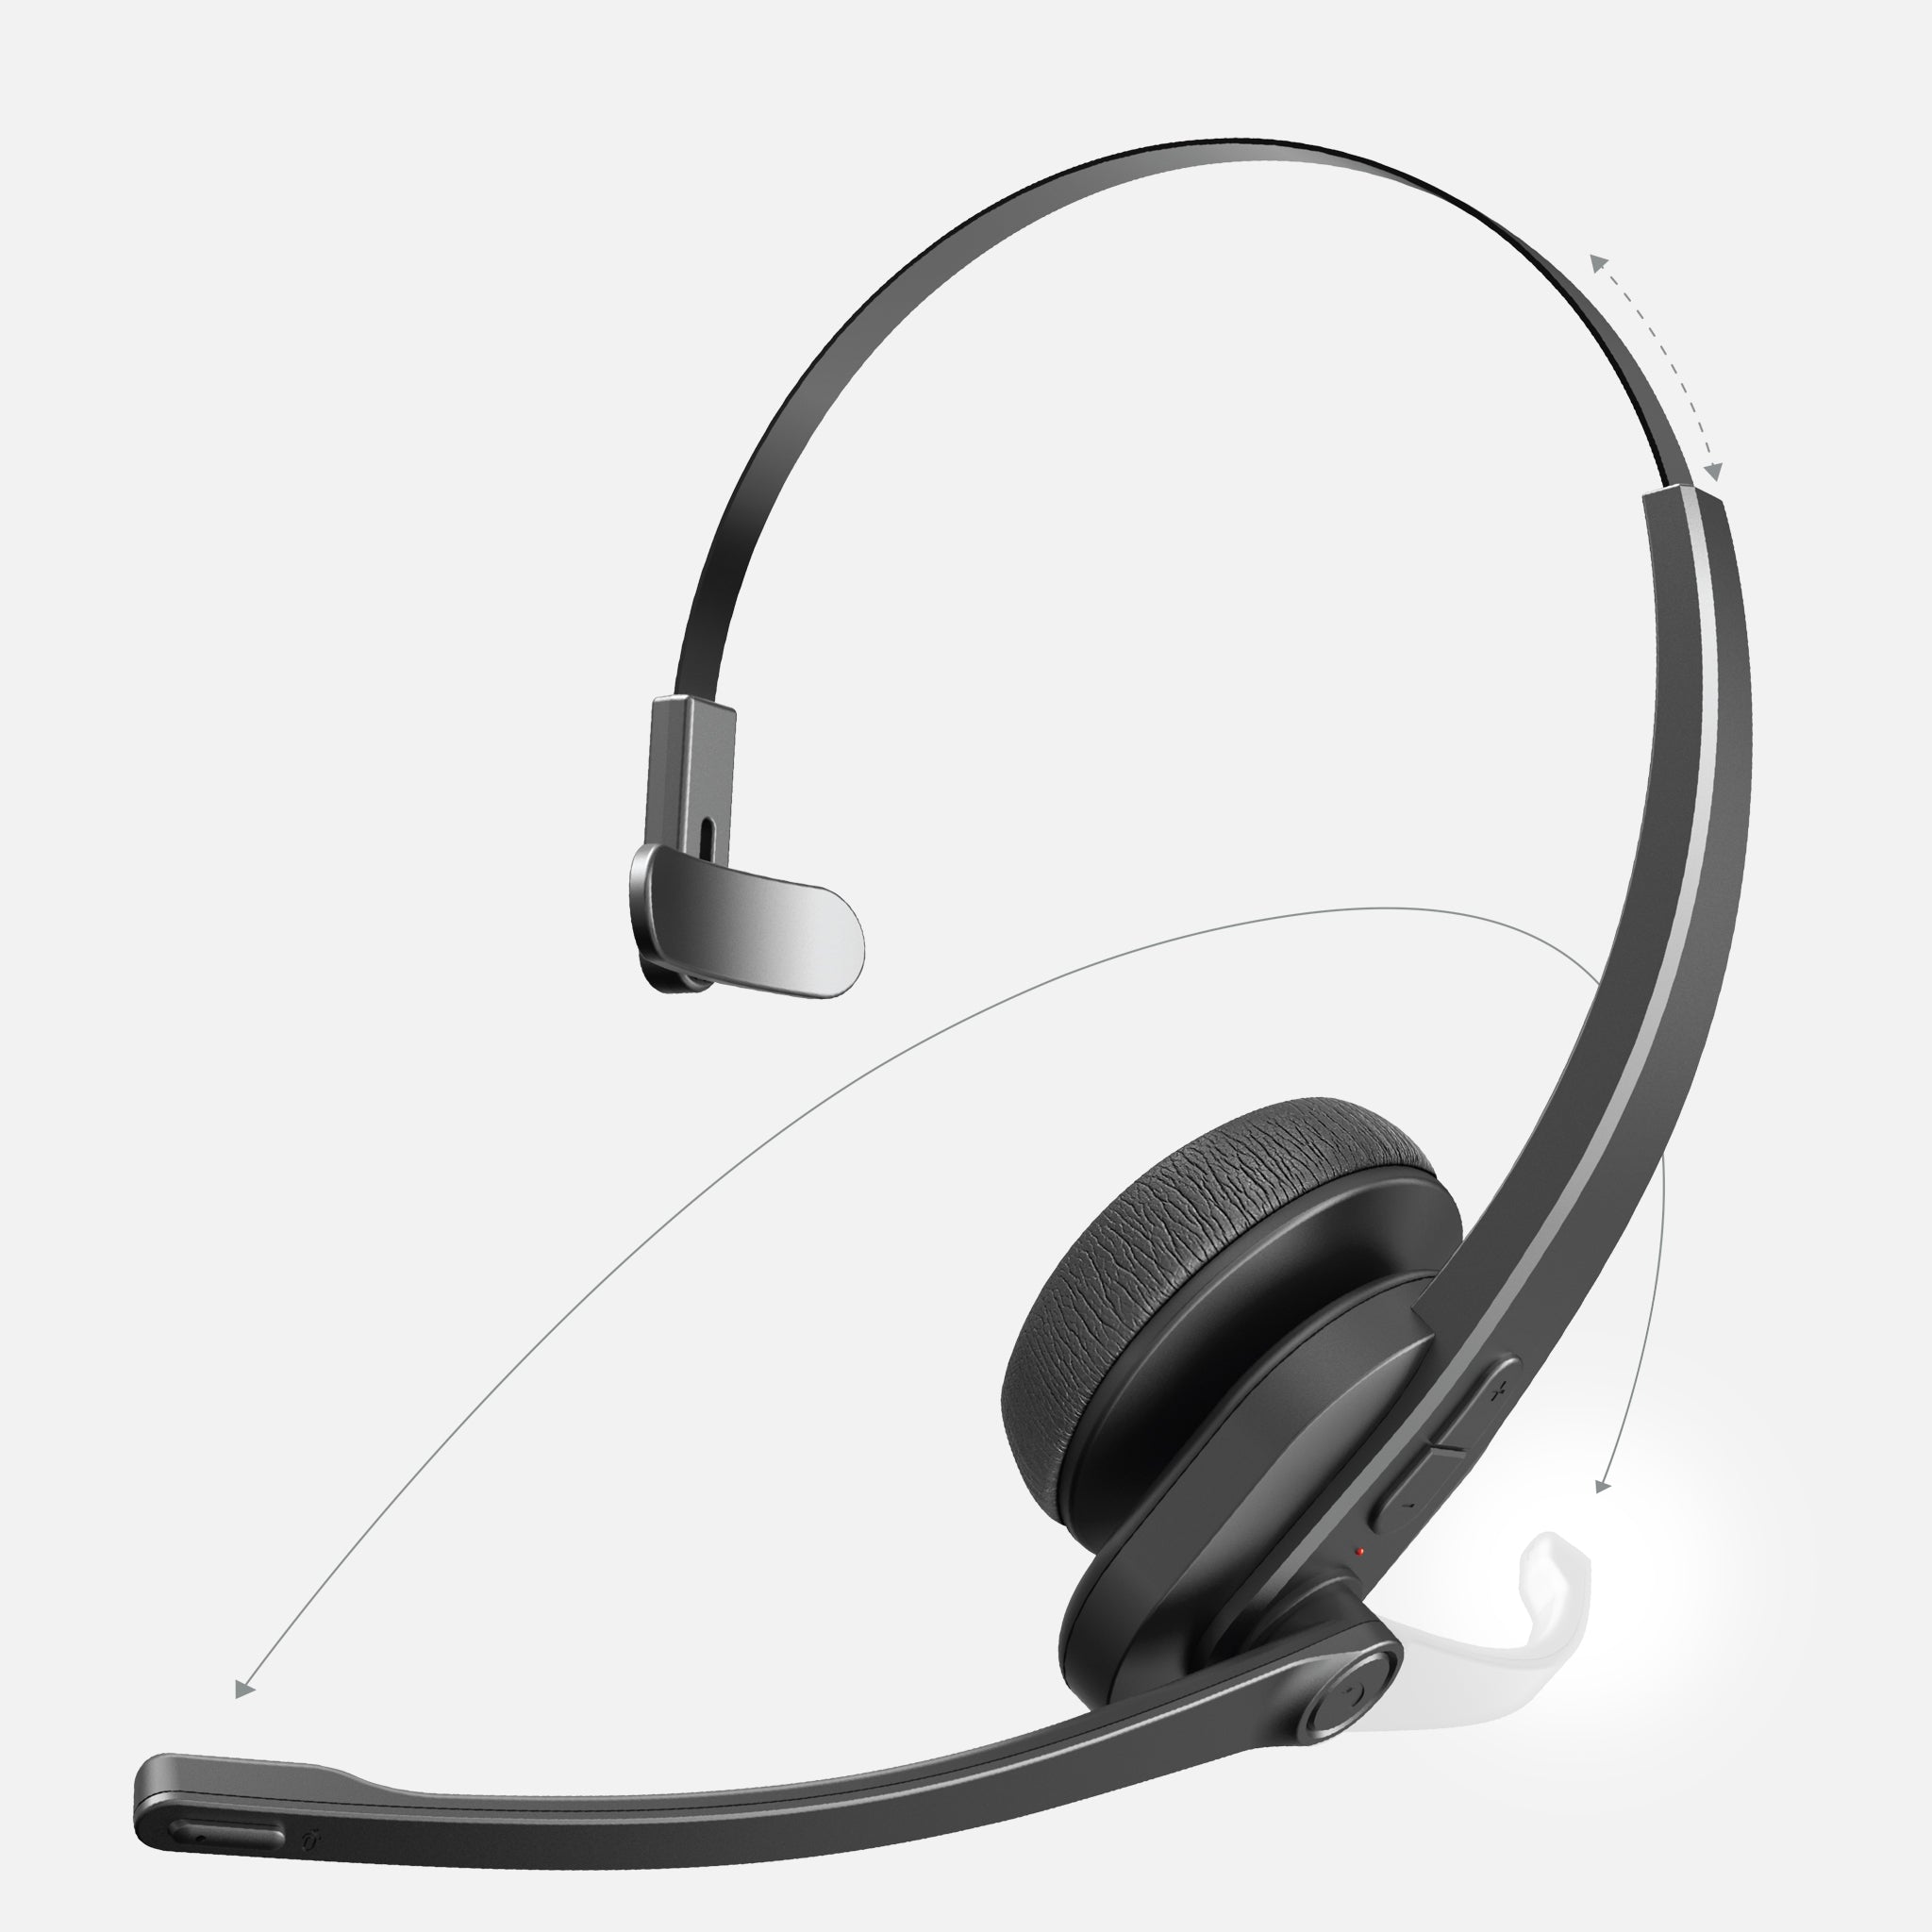 Wireless Headset with Ambient Noise-Canceling Mic - CAR AND DRIVER BT3500BK